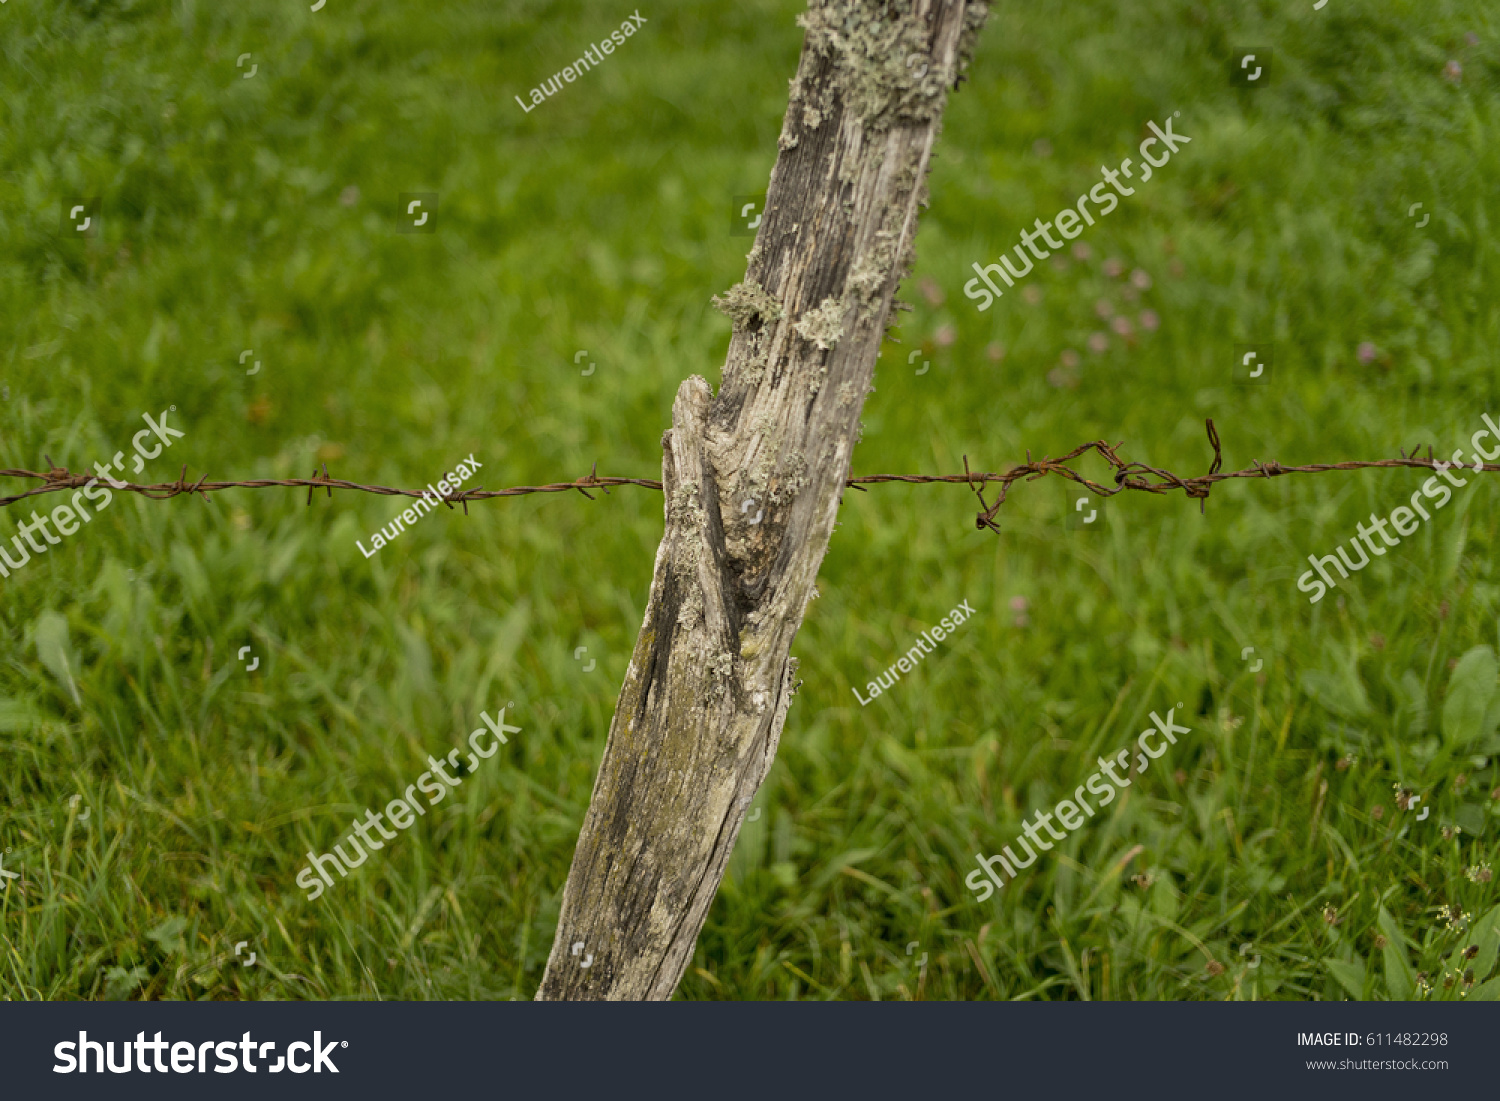 Barbed wire on a wooden stick fence enclosing a field at countryside with green field in the background #611482298